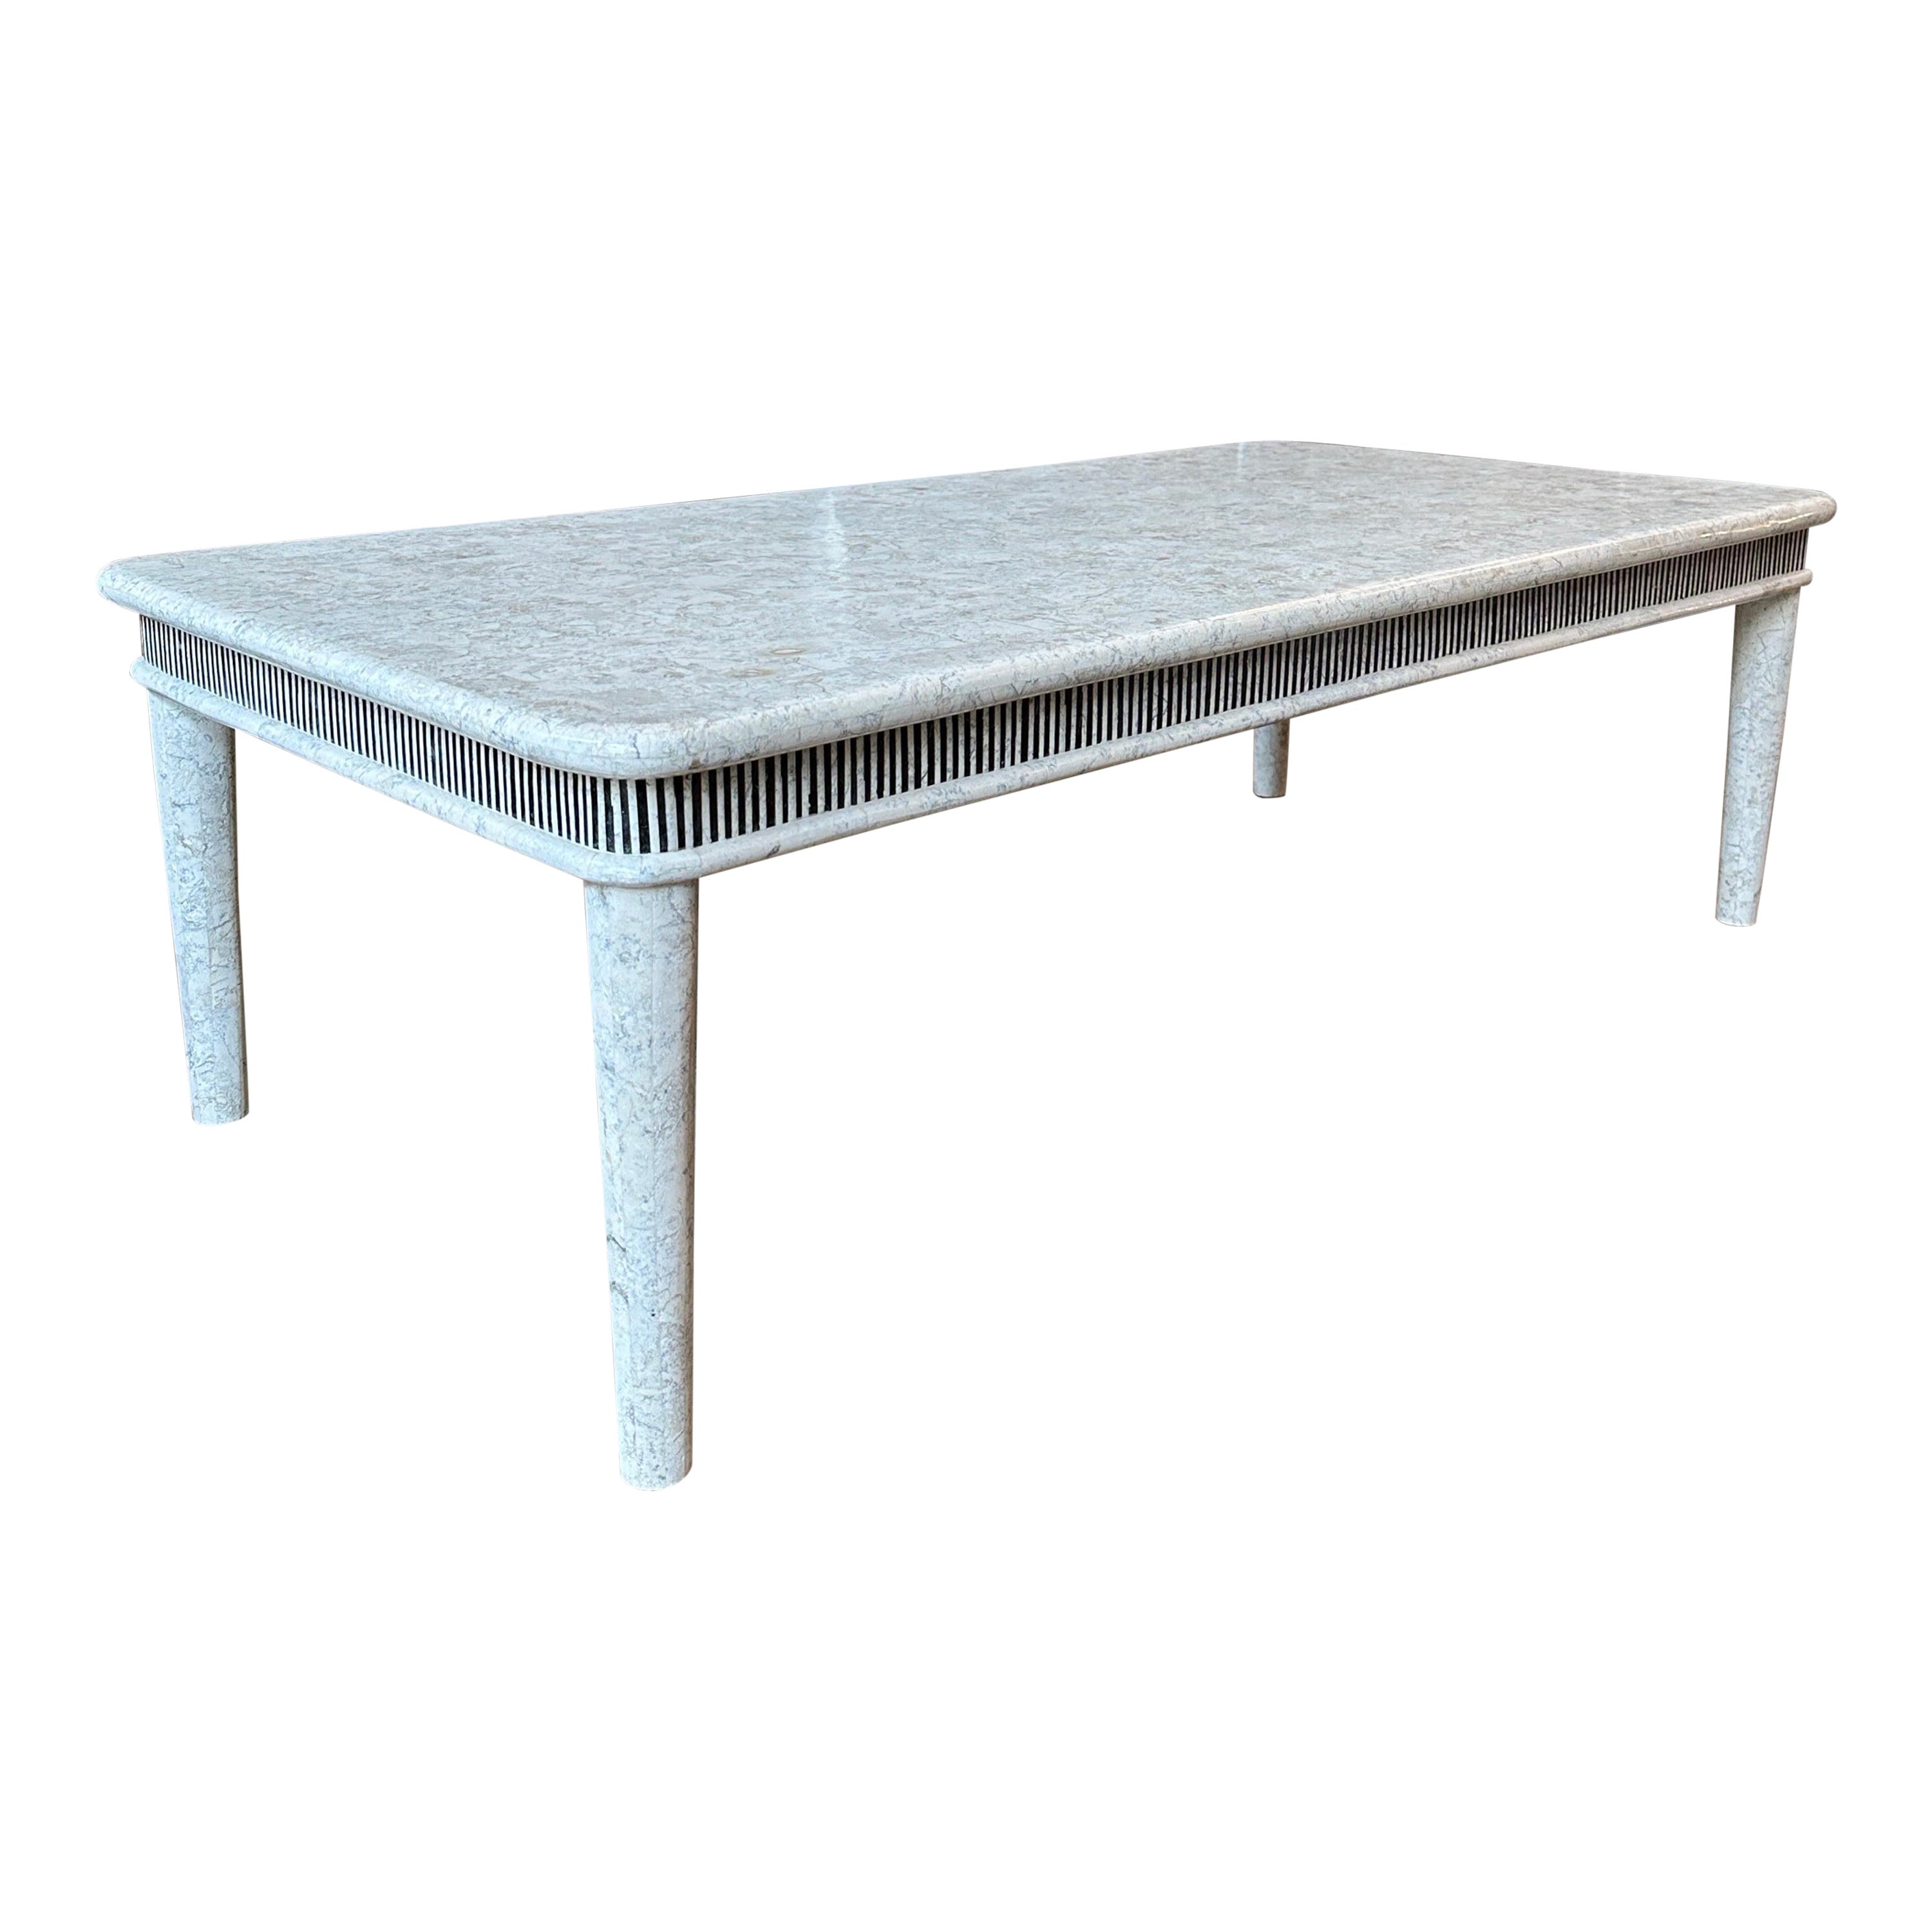 A Large Tessellated Marble Coffee Table By Maitland Smith  For Sale